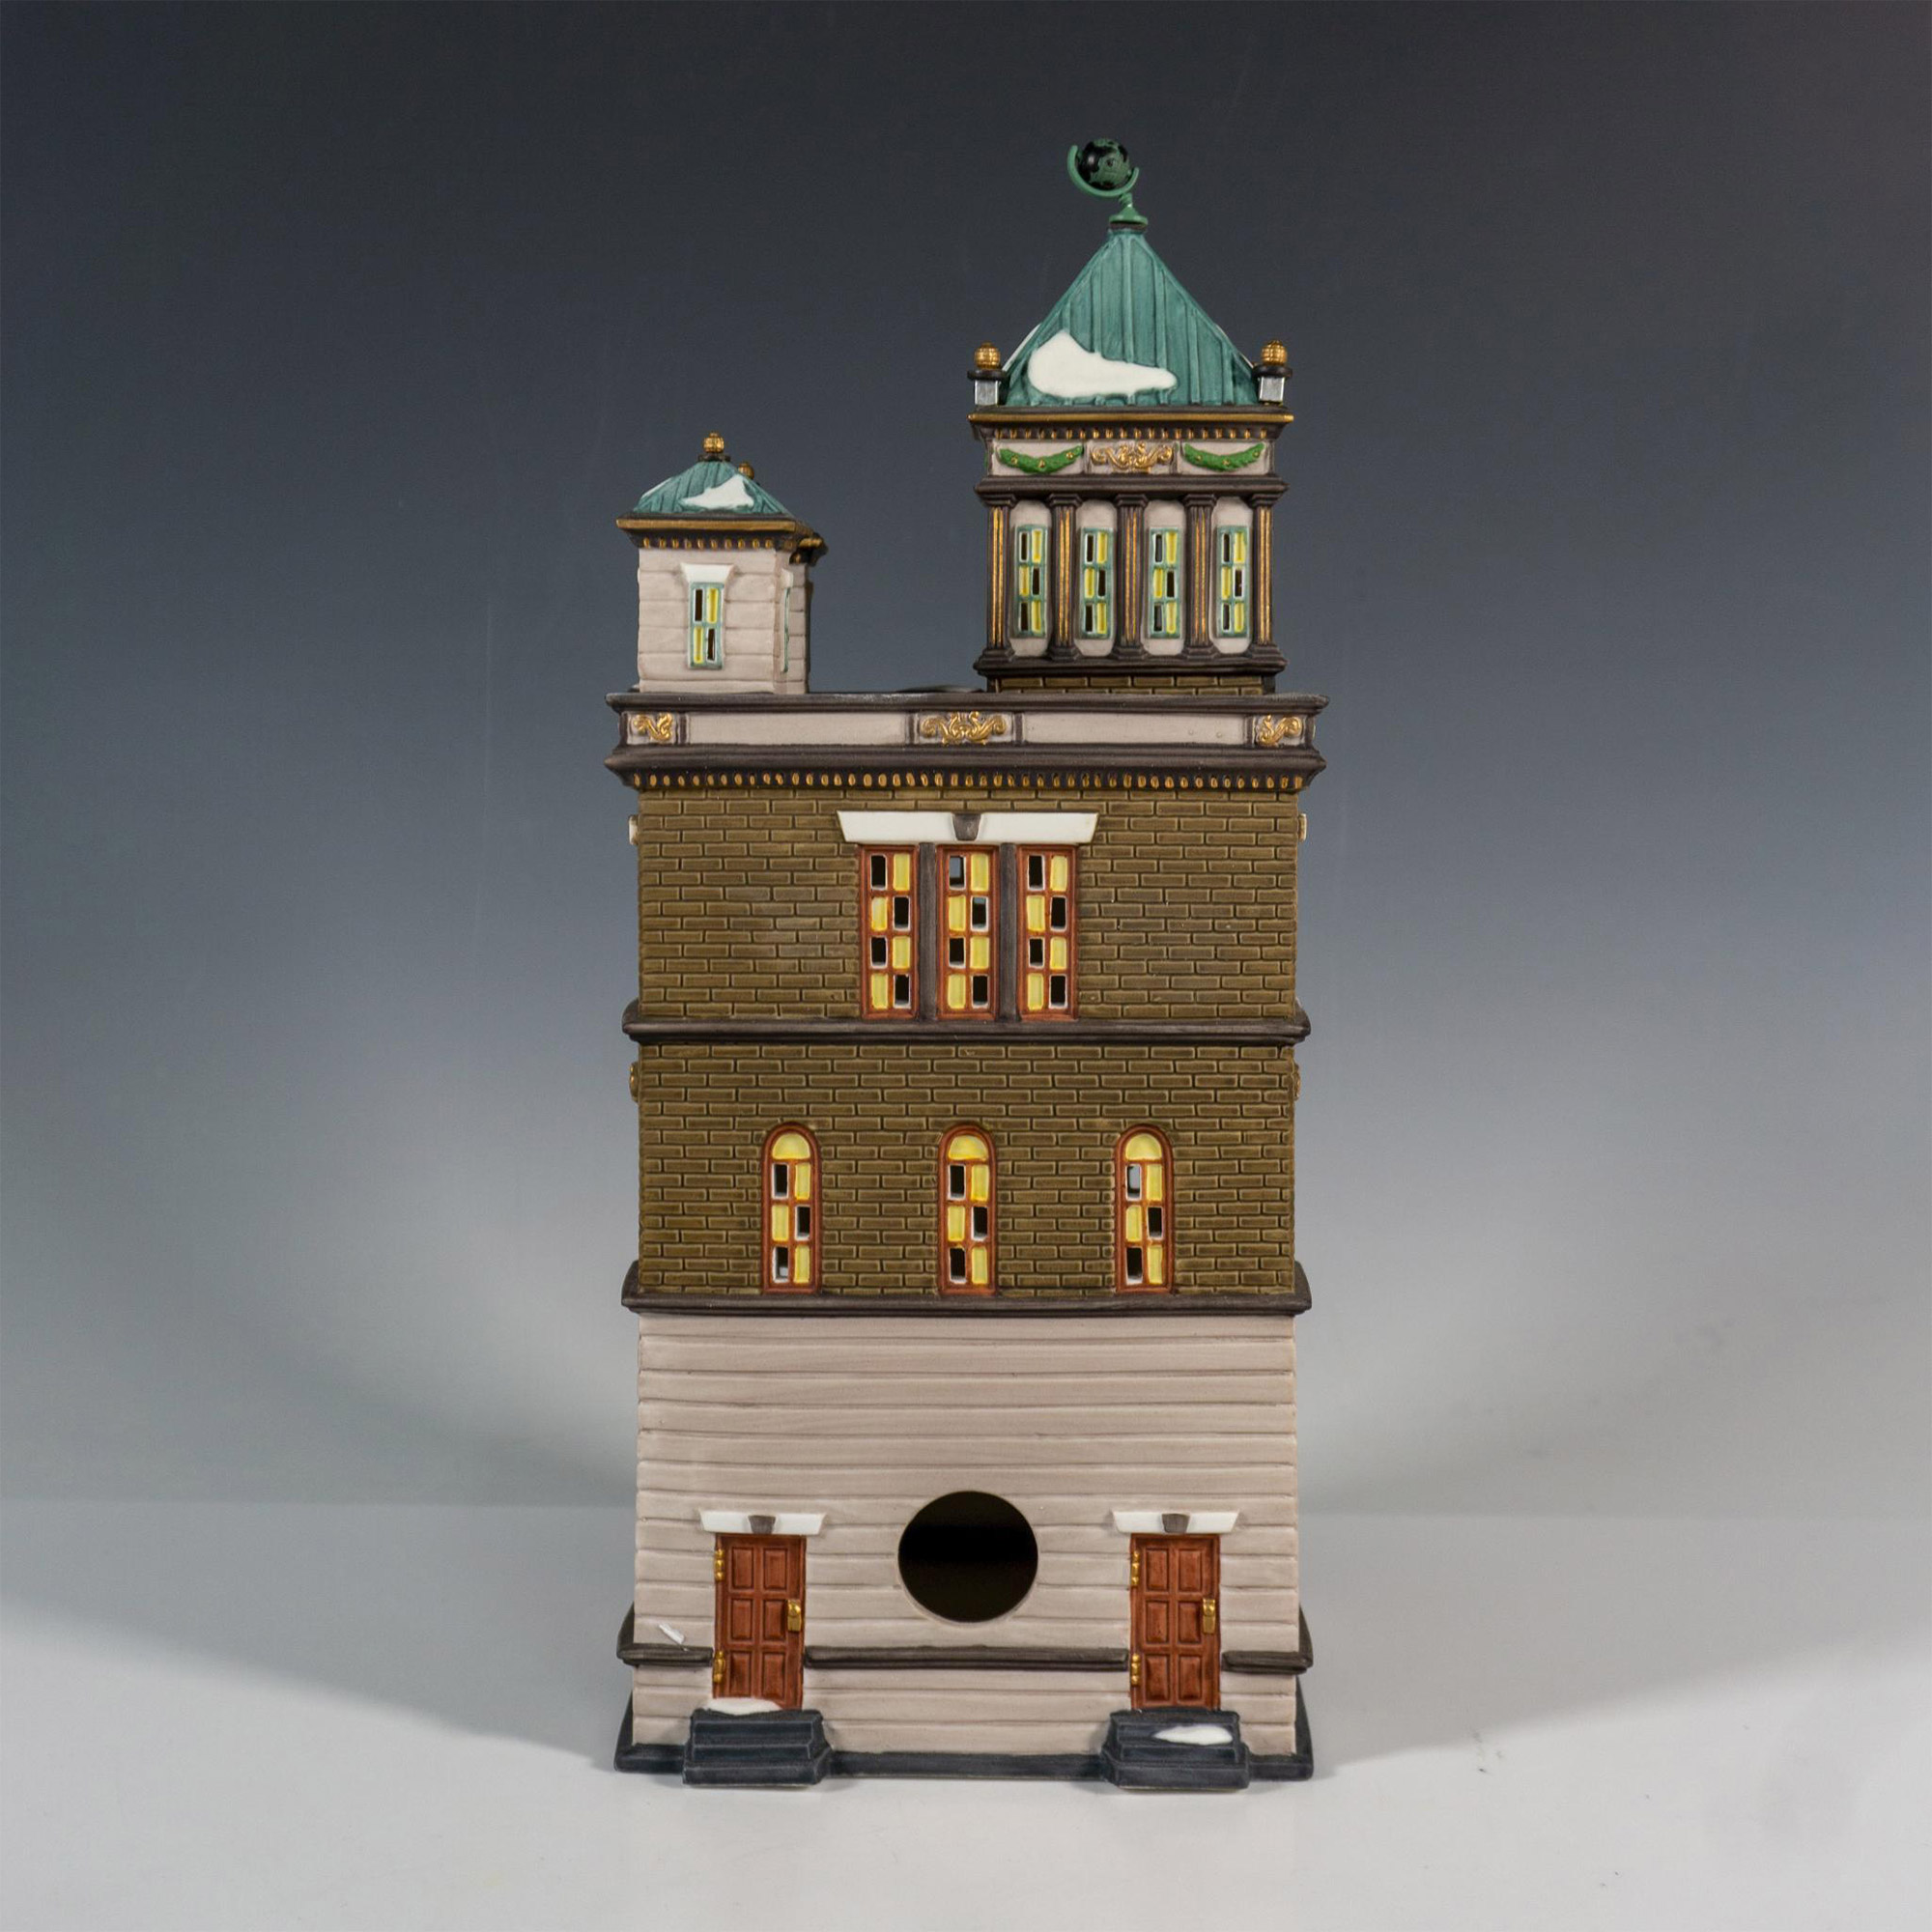 Department 56 Lighted Figurine, The City Globe - Image 3 of 4